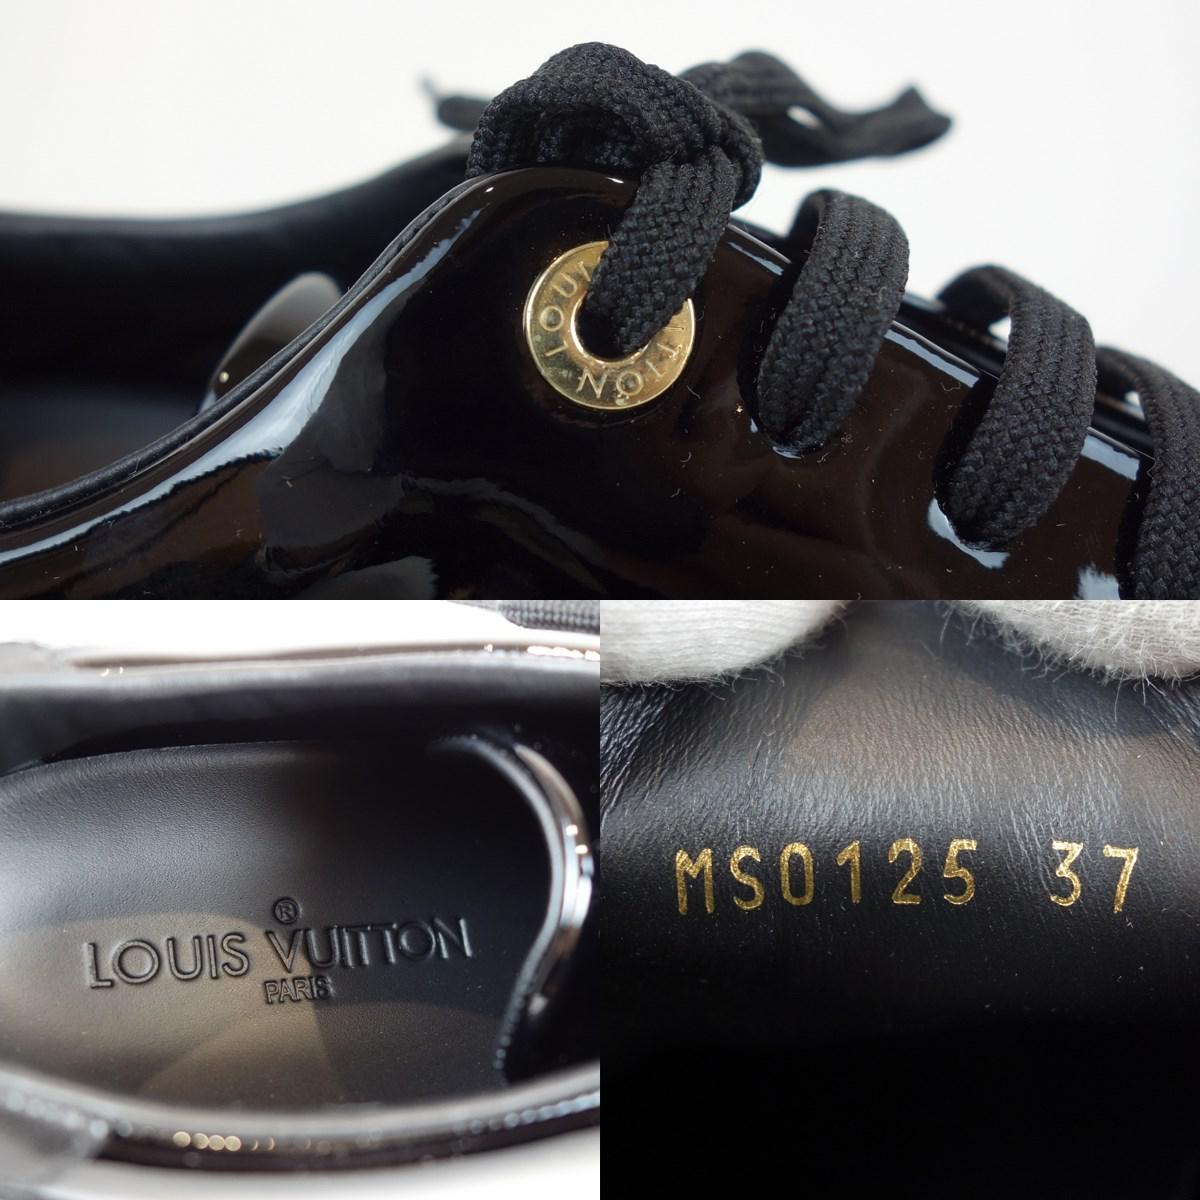 Louis Vuitton Leather Front Row Line Sneaker #37(manufactured In 2015) in Black for Men - Lyst